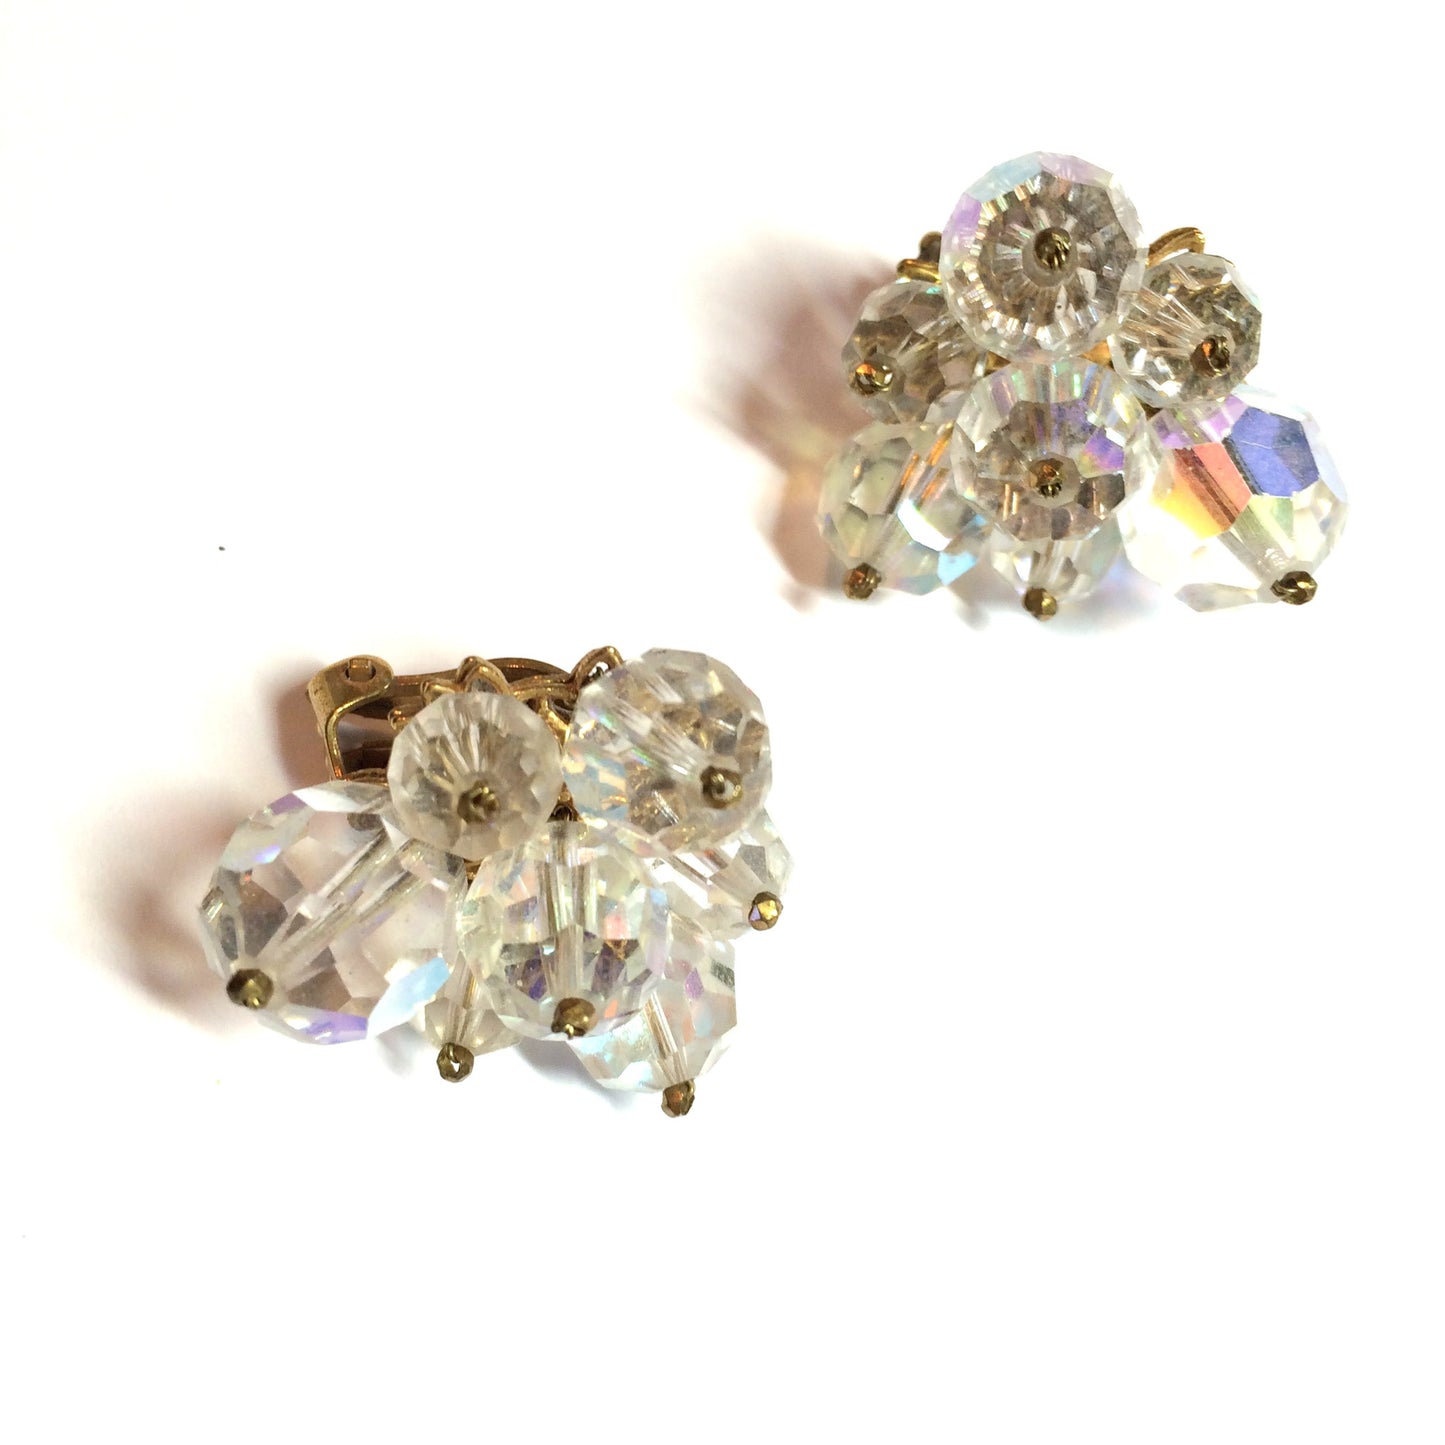 Statement Sized Austrian Crystal Bead Cluster Earrings circa 1950s